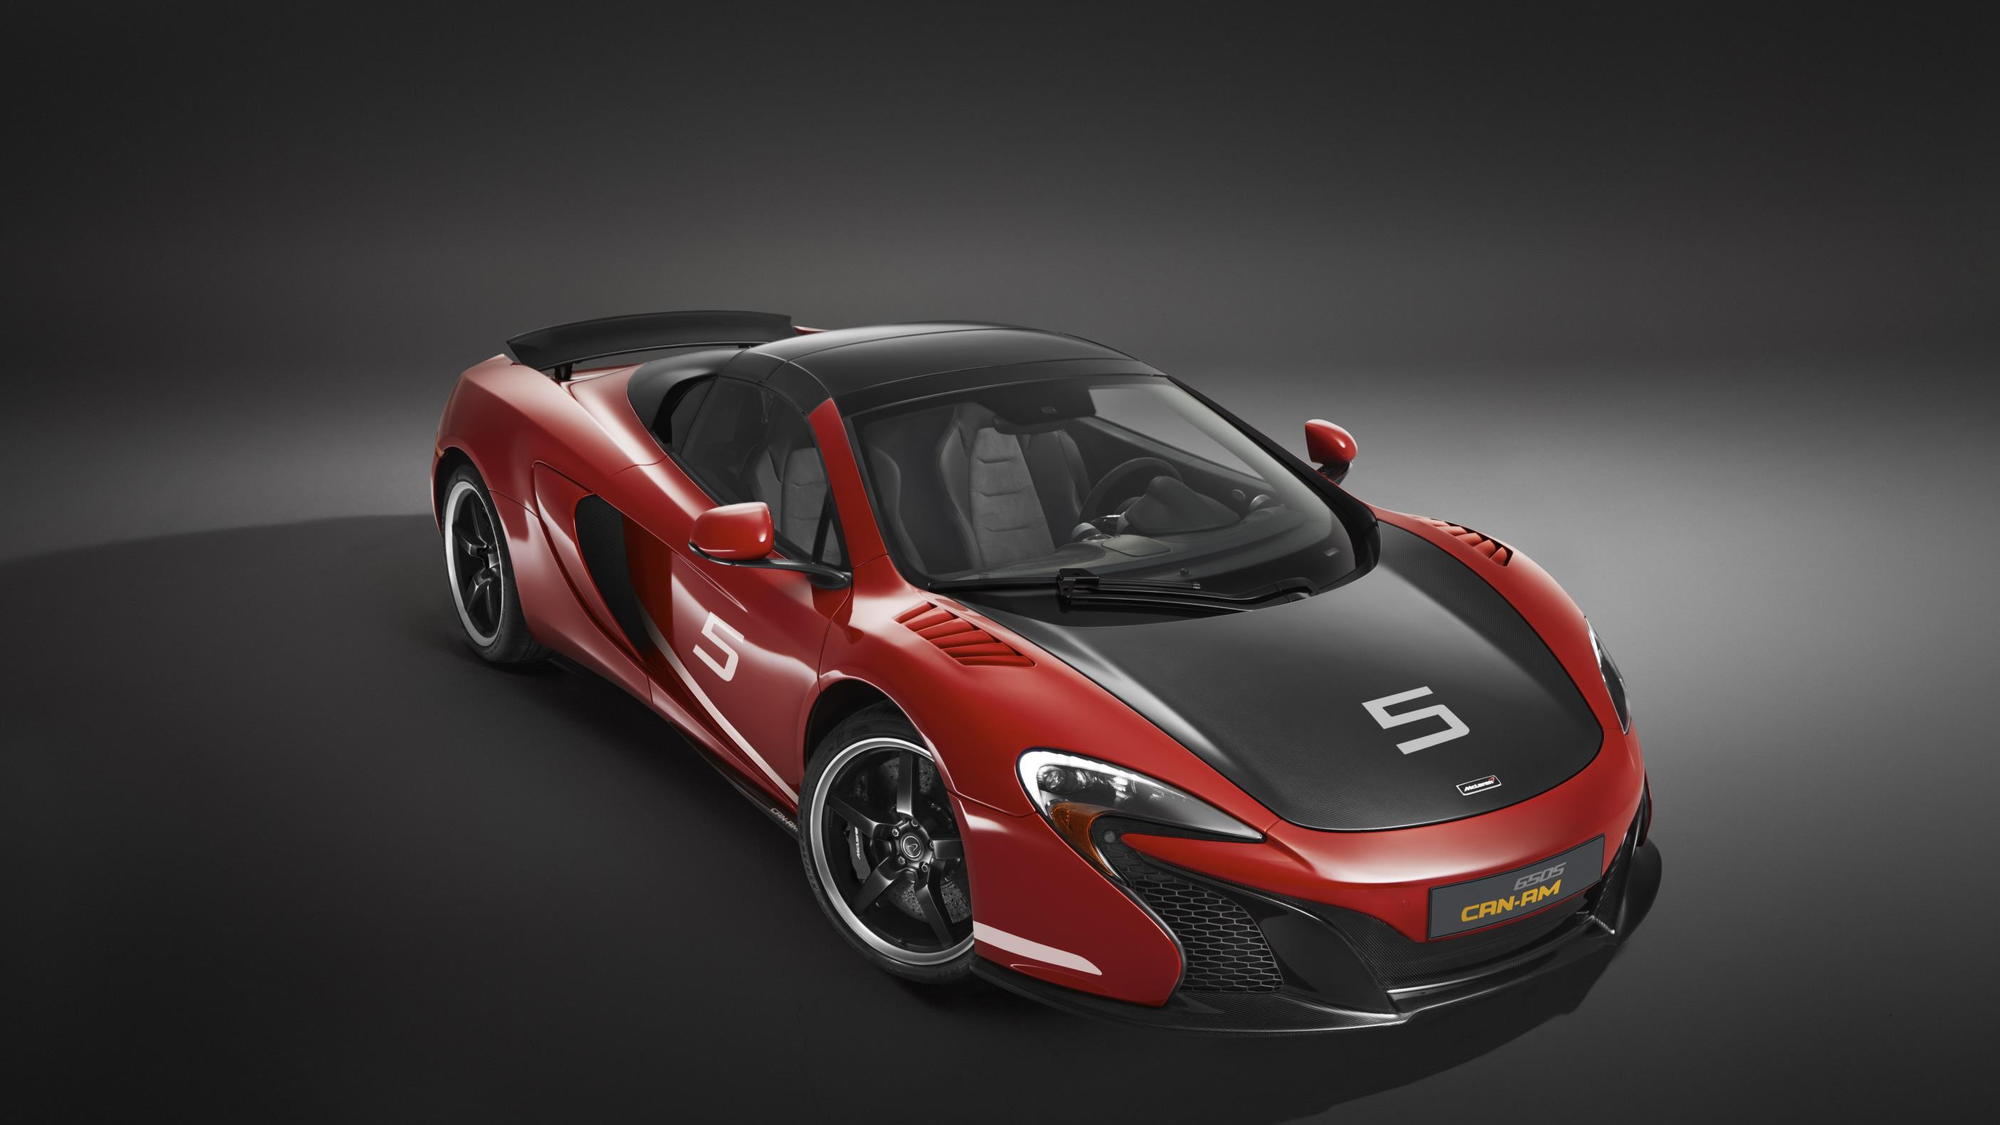 A New Year and a new look for McLaren 12C and 650S